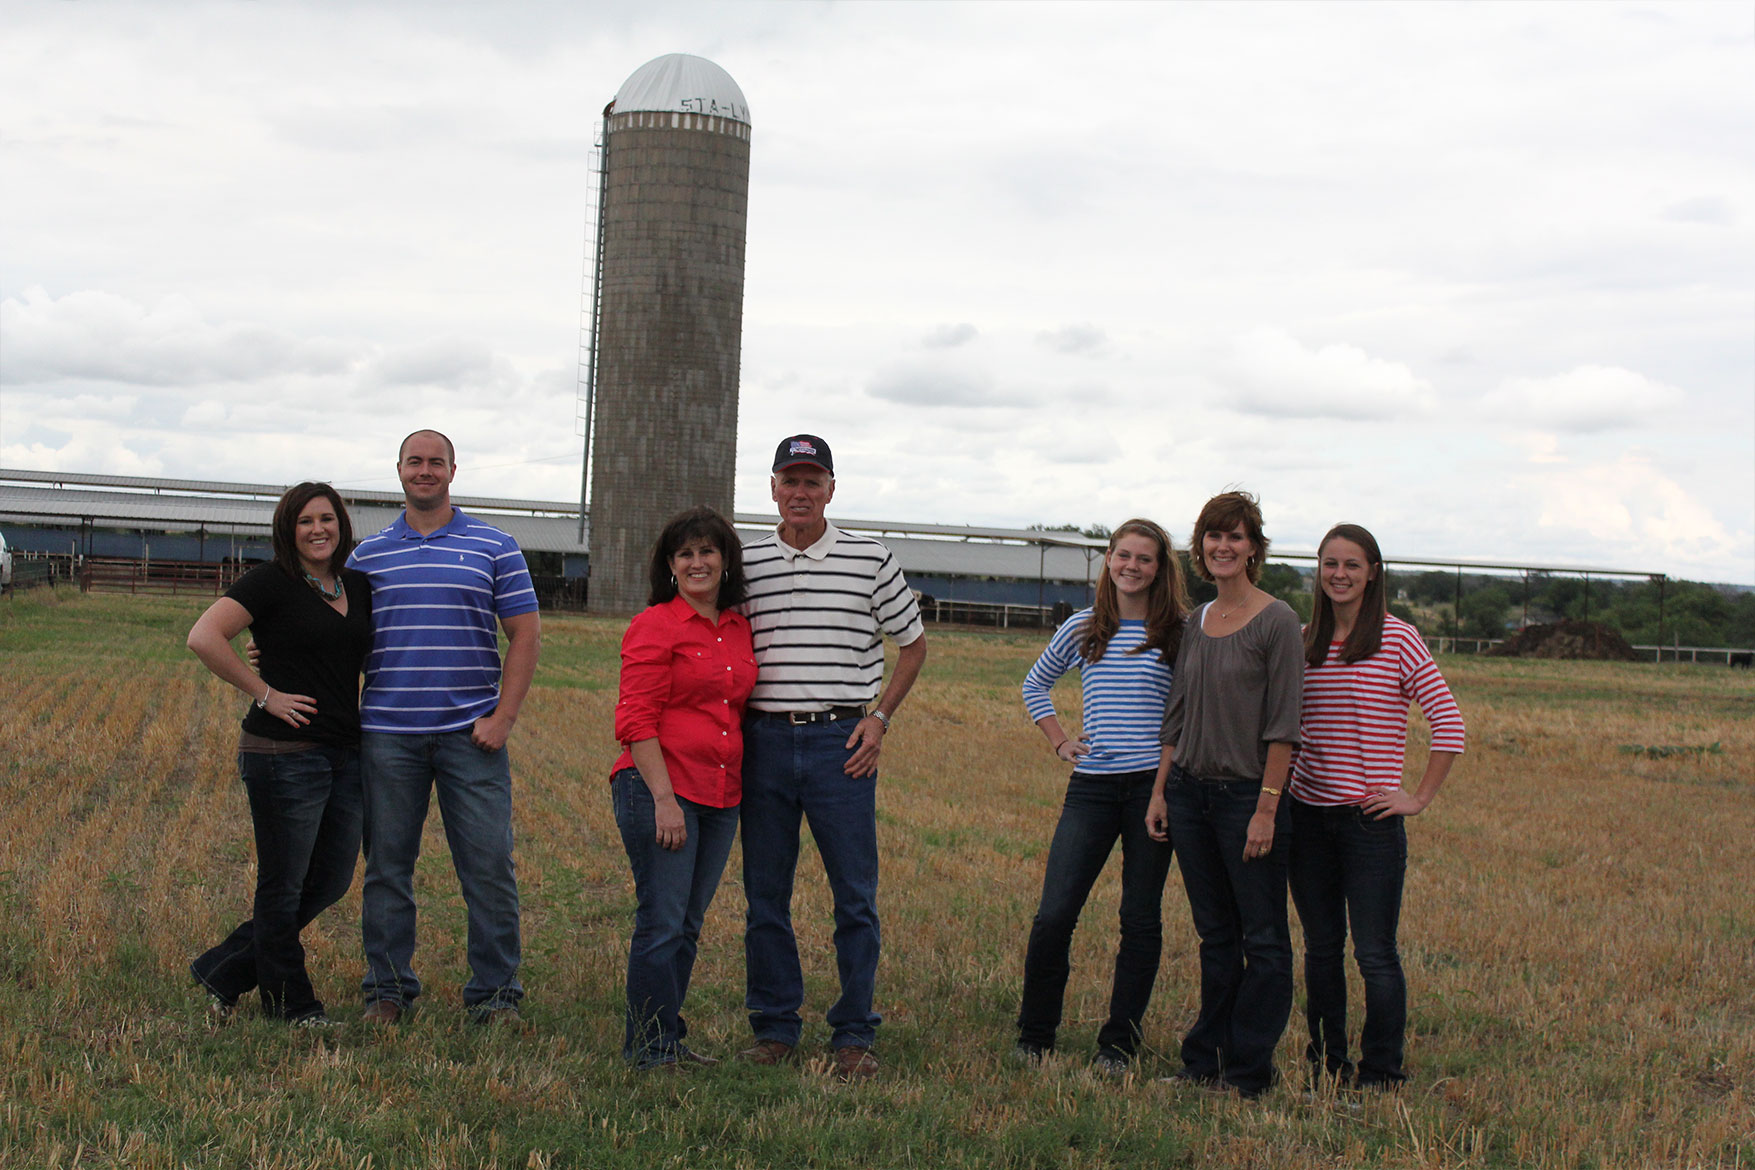 The whole Haedge family poses for a photo in front of the dairy.